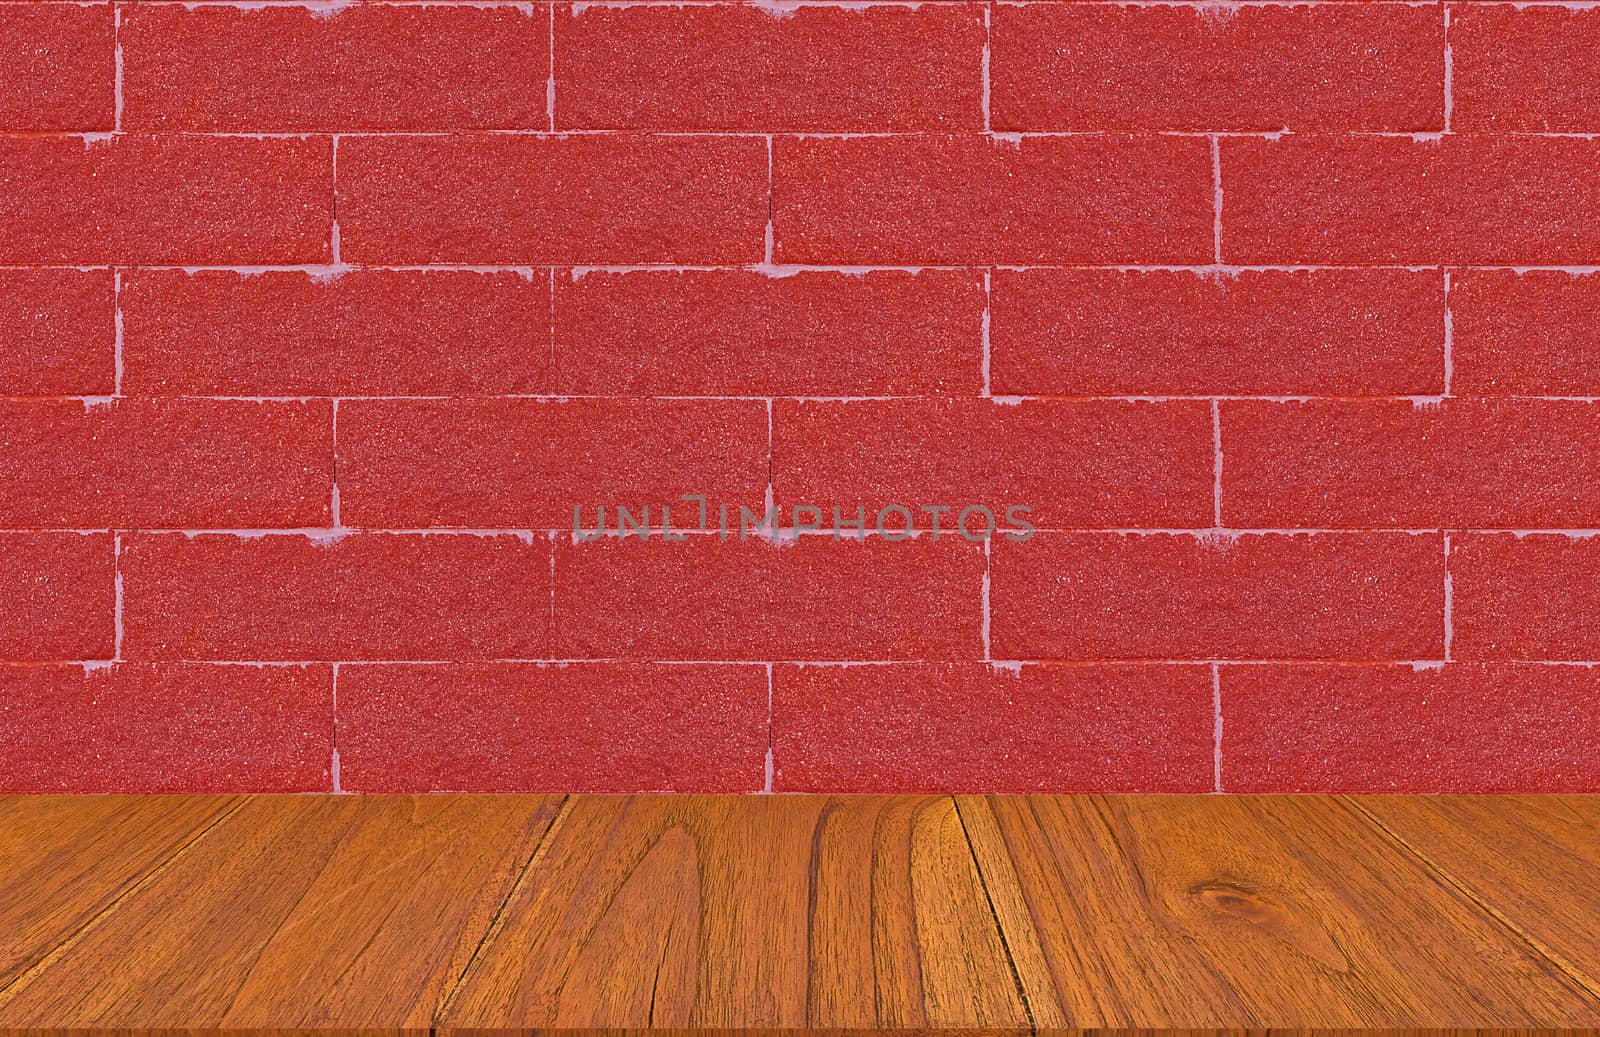 Wood table on red brick wall background, montage or display product concept